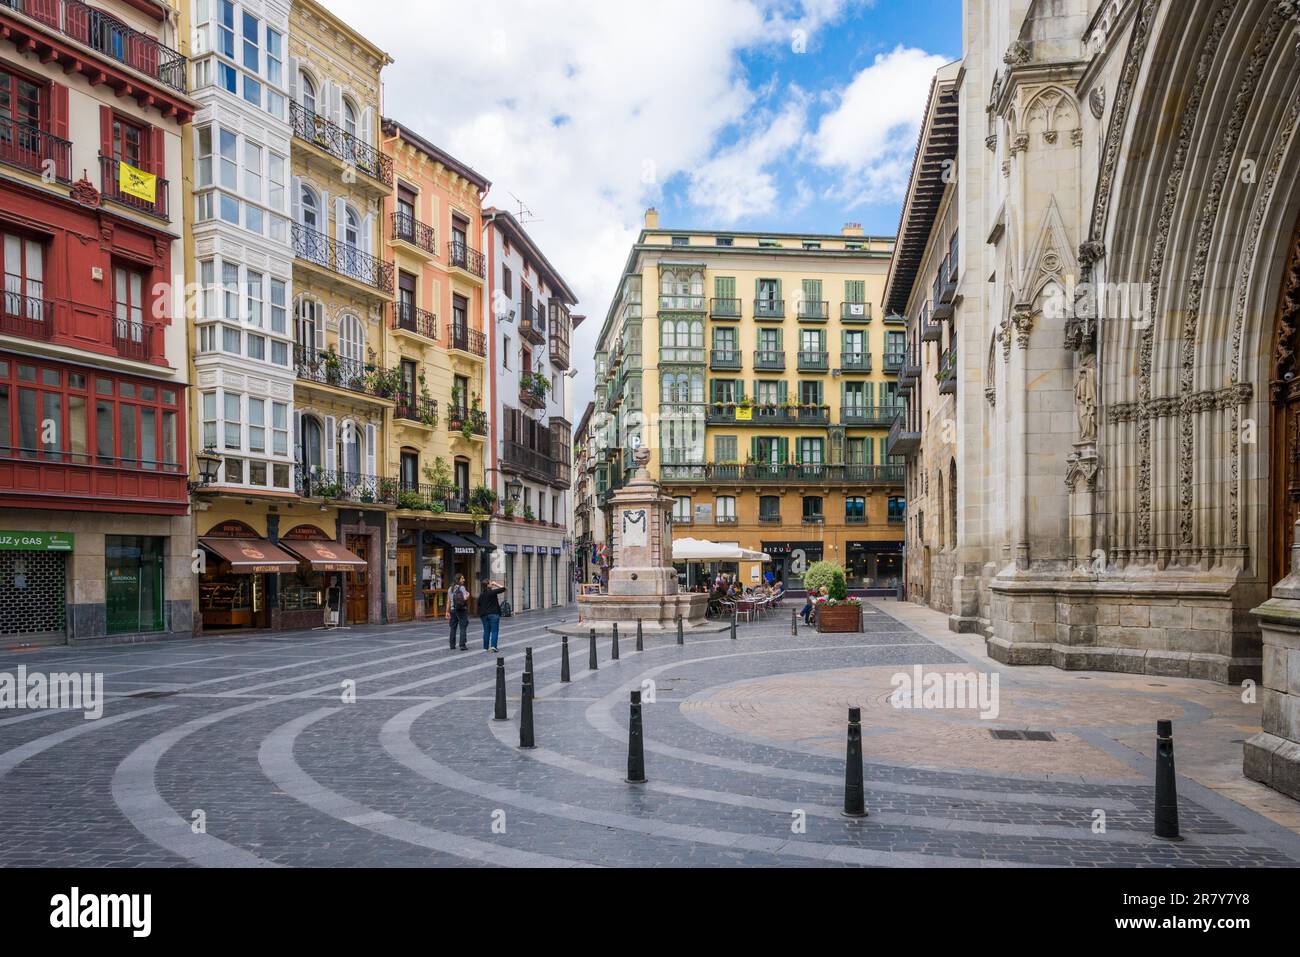 The St. James square, basque, Done Jakue plaza in the old town of Bilbao. it is a medieval neighbourhood in the Casco Viejo with the Cathedral in Stock Photo